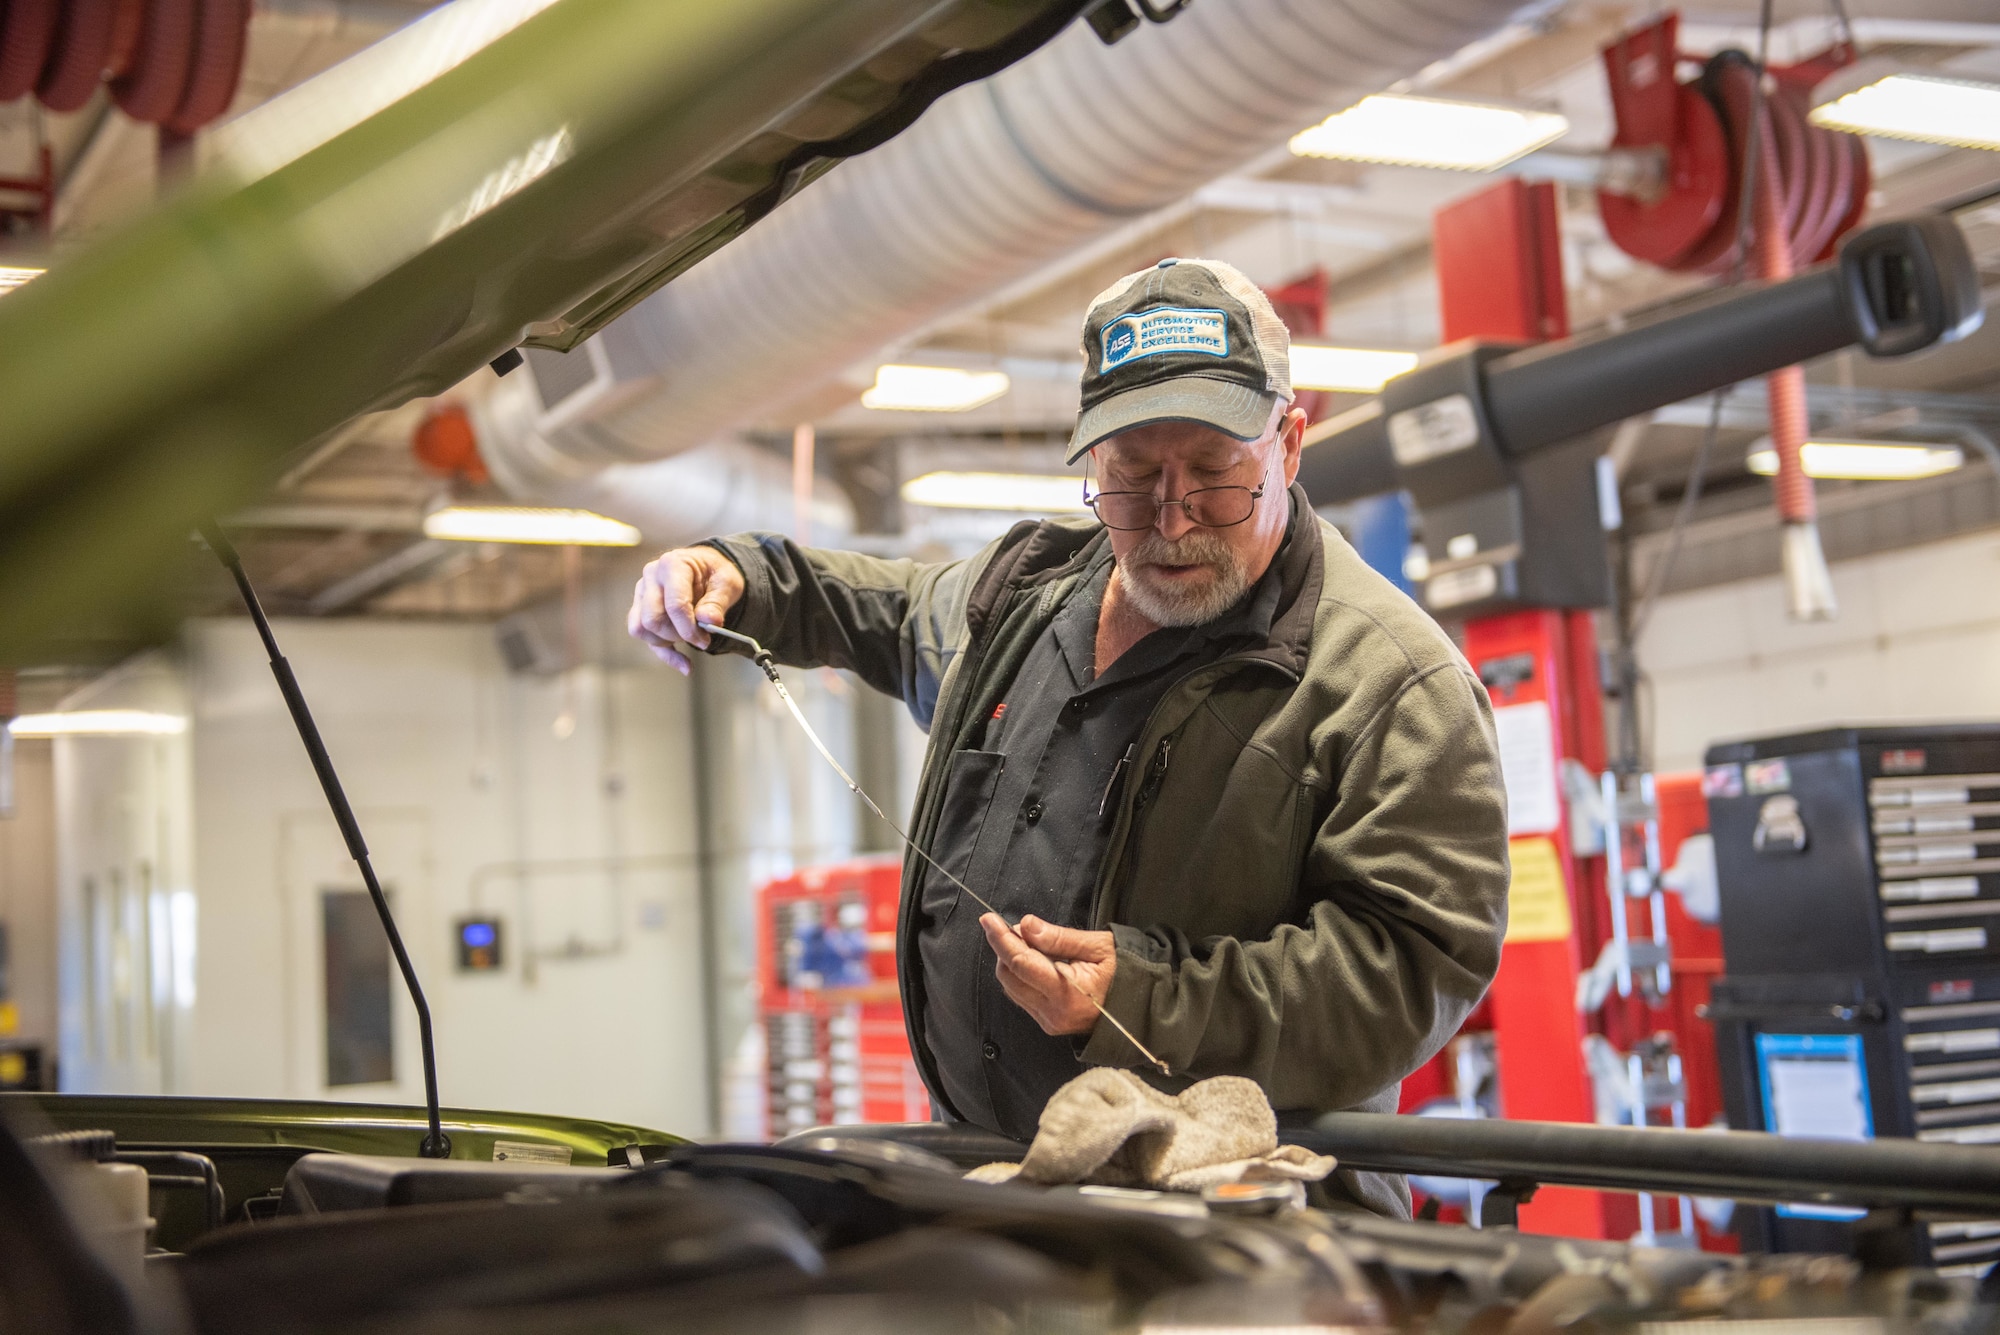 Billie Woods, 22nd Force Support Squadron Auto Shop mechanic, checks a vehicles oil levels Nov. 19, 2019, at McConnell Air Force Base, Kan. Woods inspected batteries, brakes, fluids, visors and lights then provided feedback and recommendations to less mechanically inclined drivers to give them confidence for the winter. (U.S. Air Force photo by Staff Sgt. Chris Thornbury)